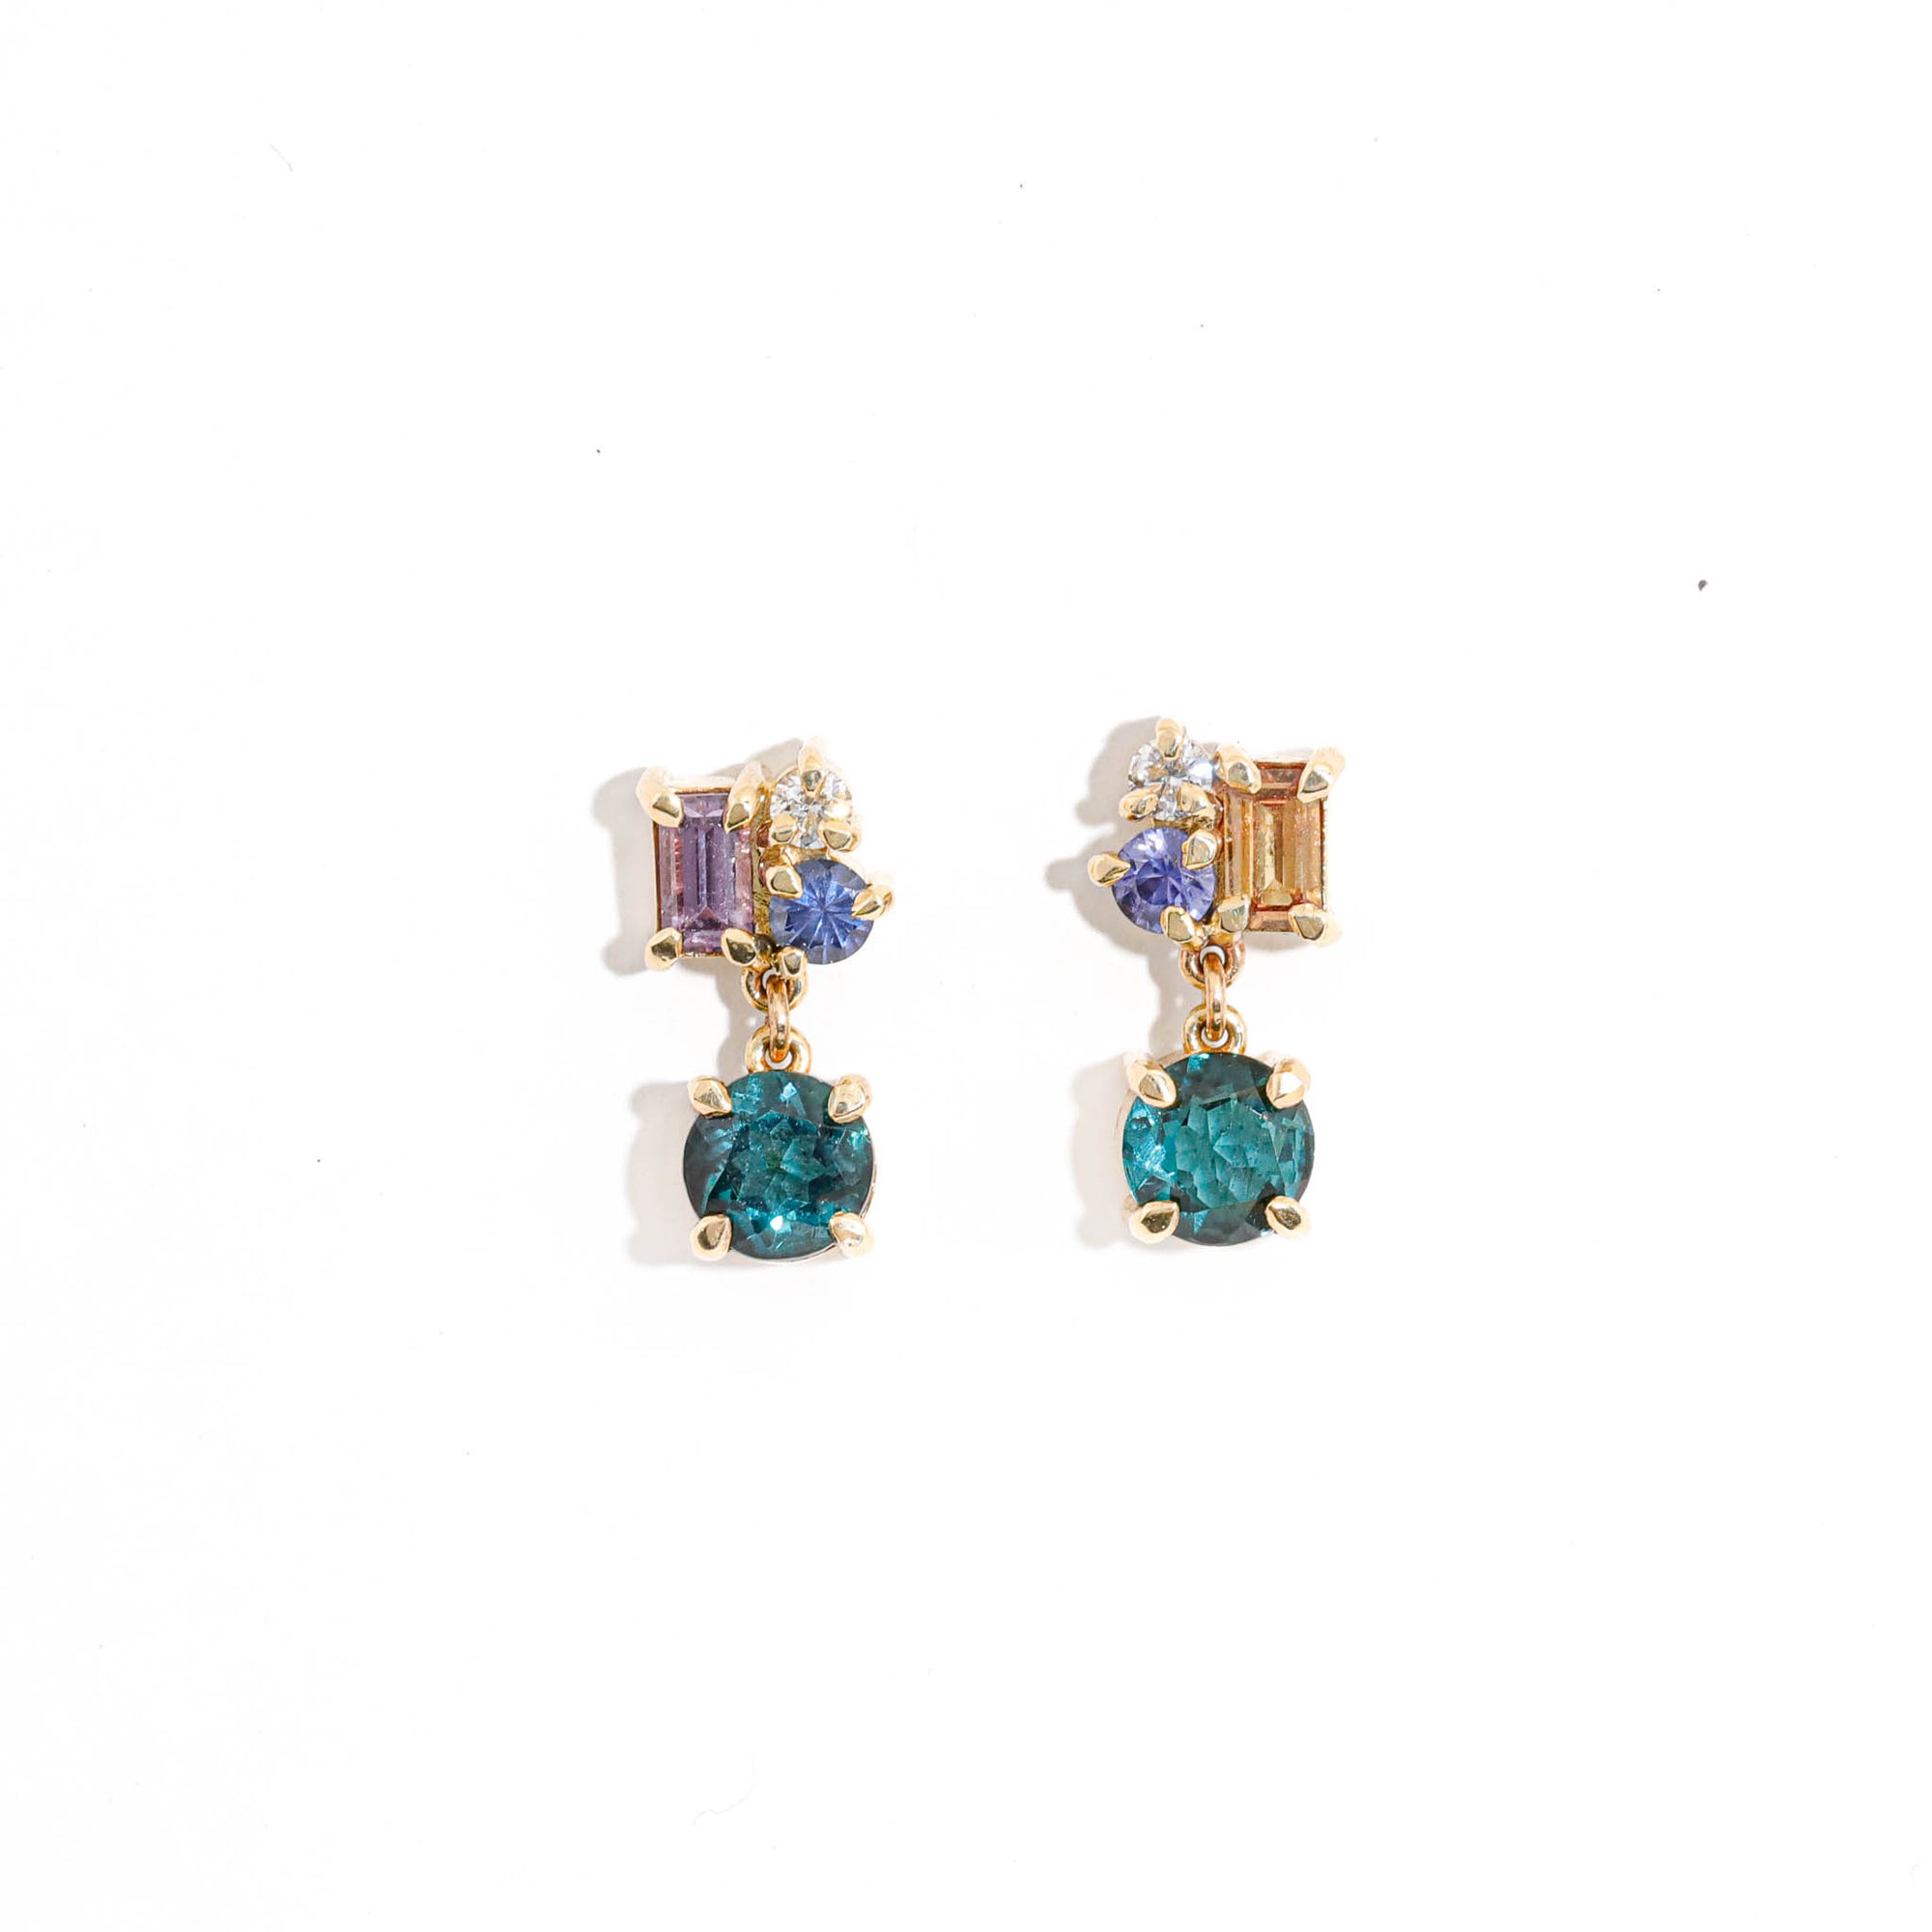 Emerald Cut and Round Cut Purple and Orange Sapphire, Round Cut Champagne Diamond and Round Cut Purple/Blue, Light Purple Tourmaline Cluster Earrings in 9 Carat Yellow Gold